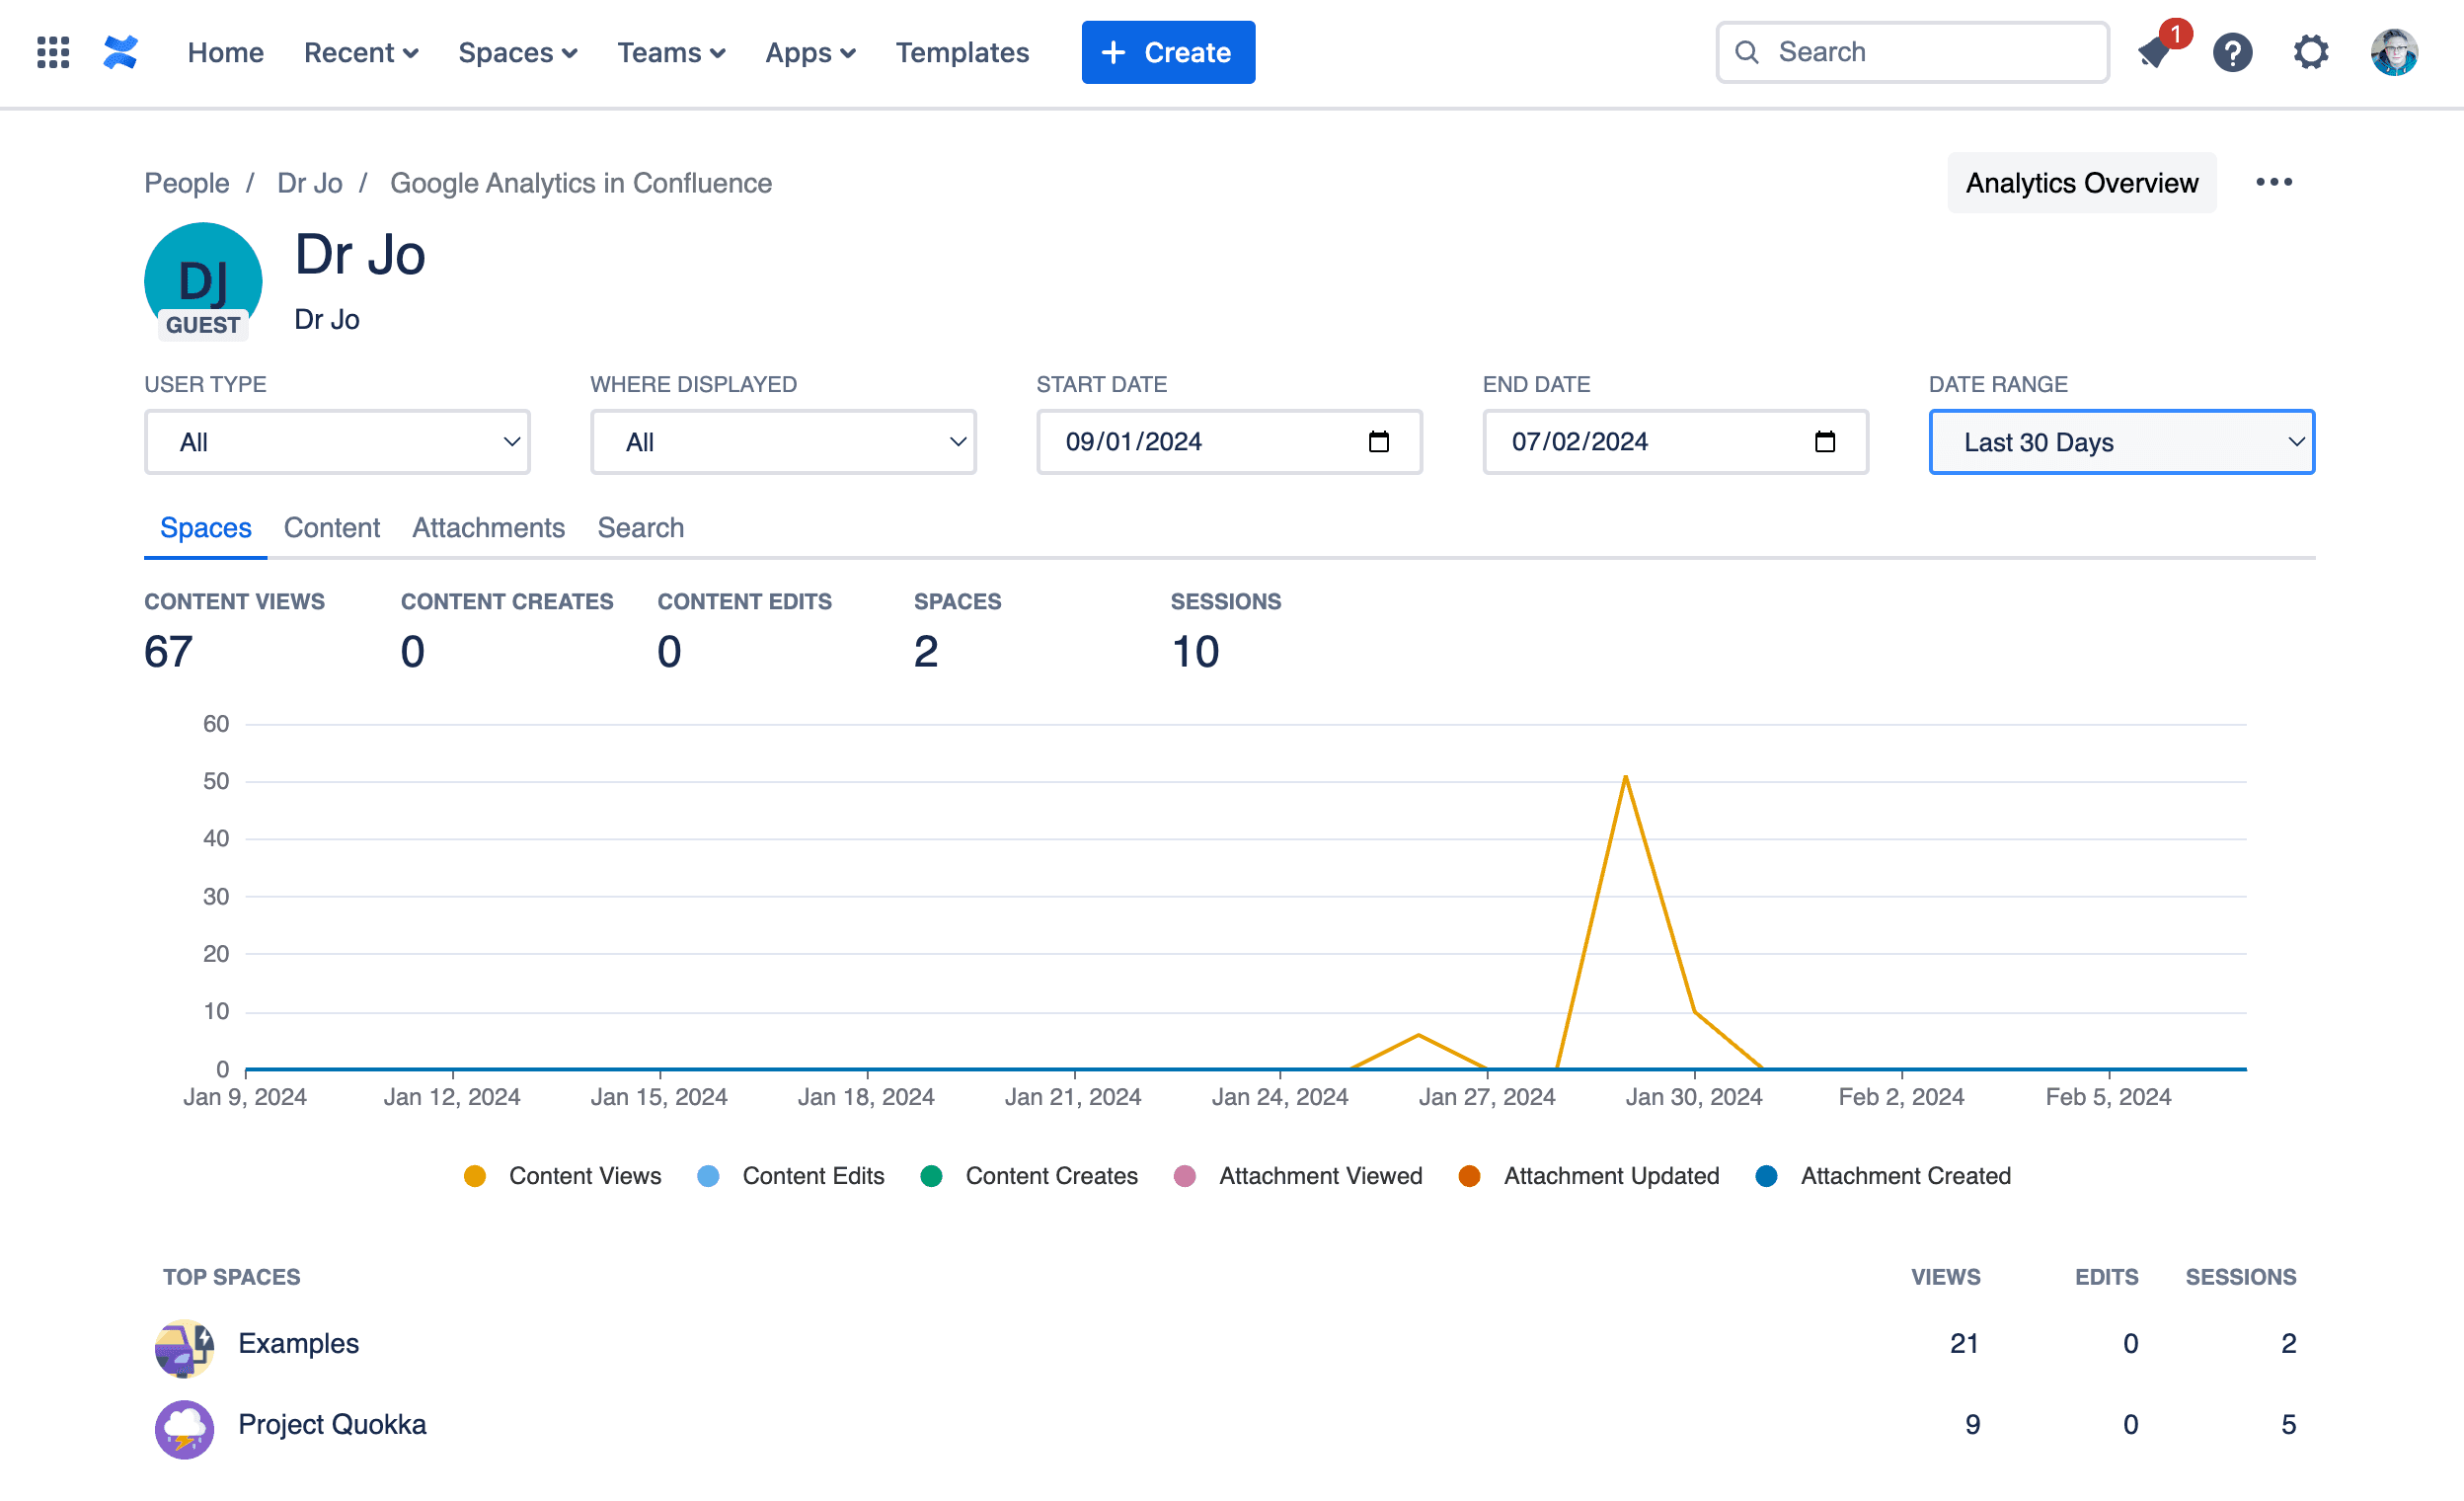 People Analytics in Confluence